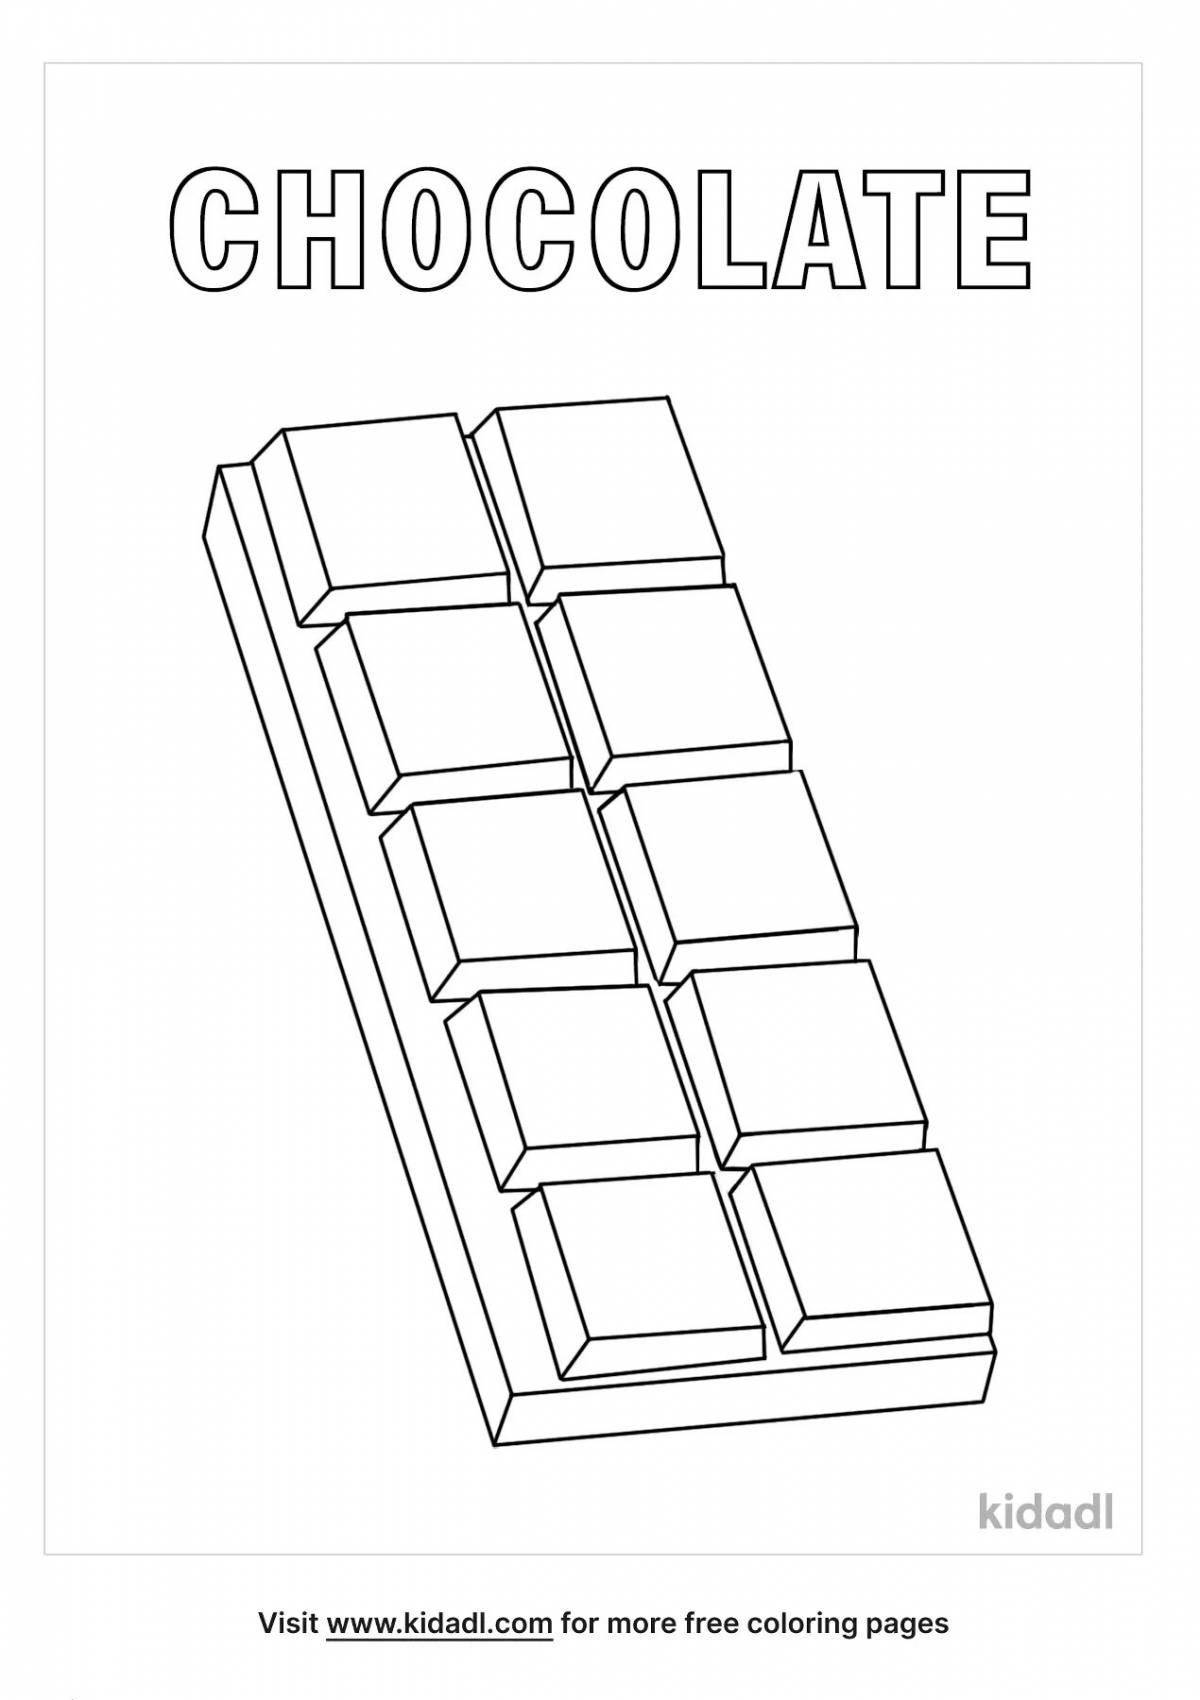 Fascinating chocolate coloring book for kids